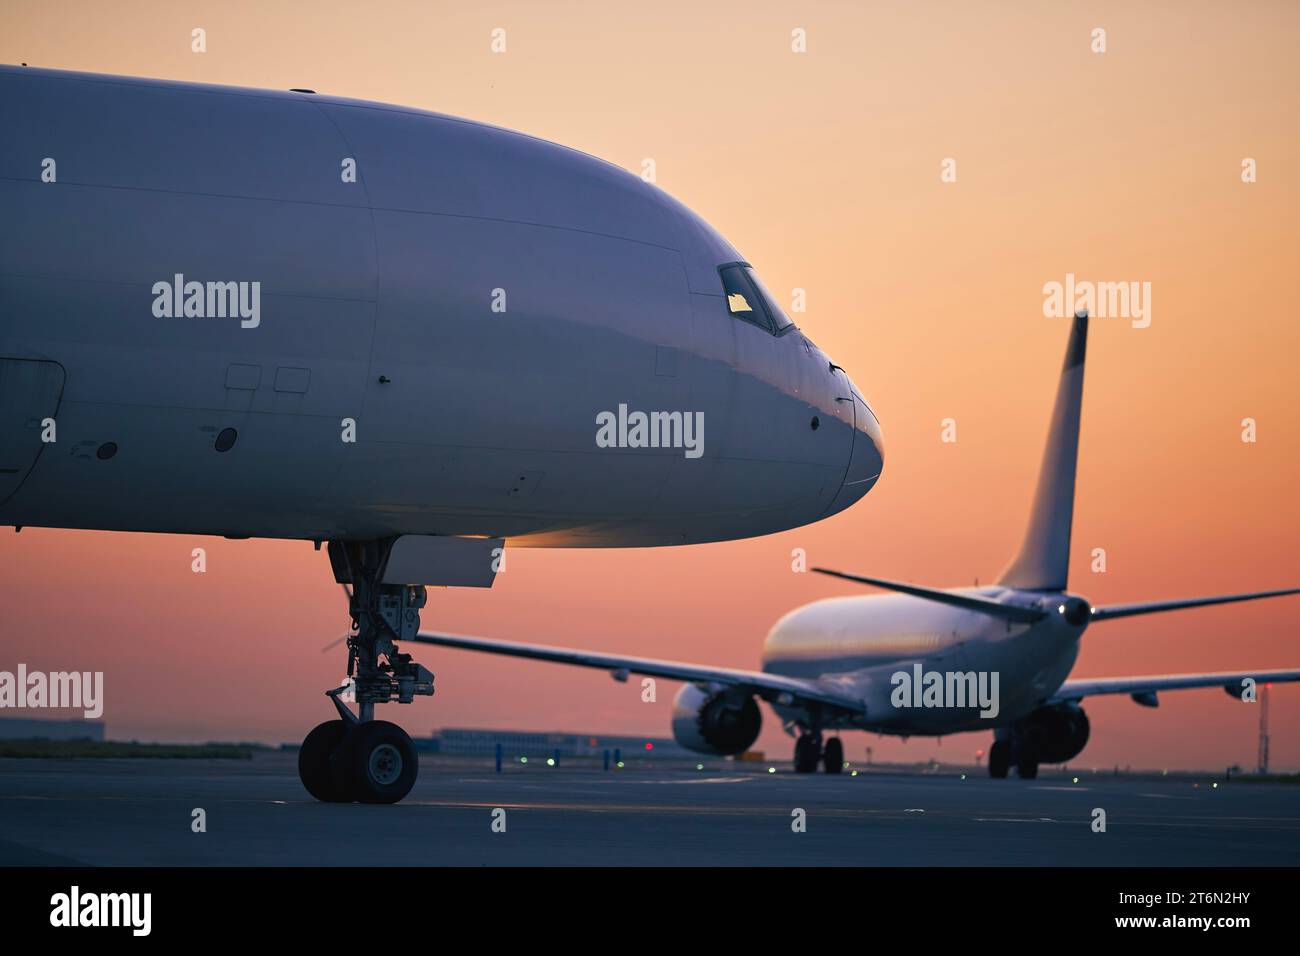 Cargo airplane is taxiing behind passenger airplane during morning busy traffic to airport runway. Stock Photo